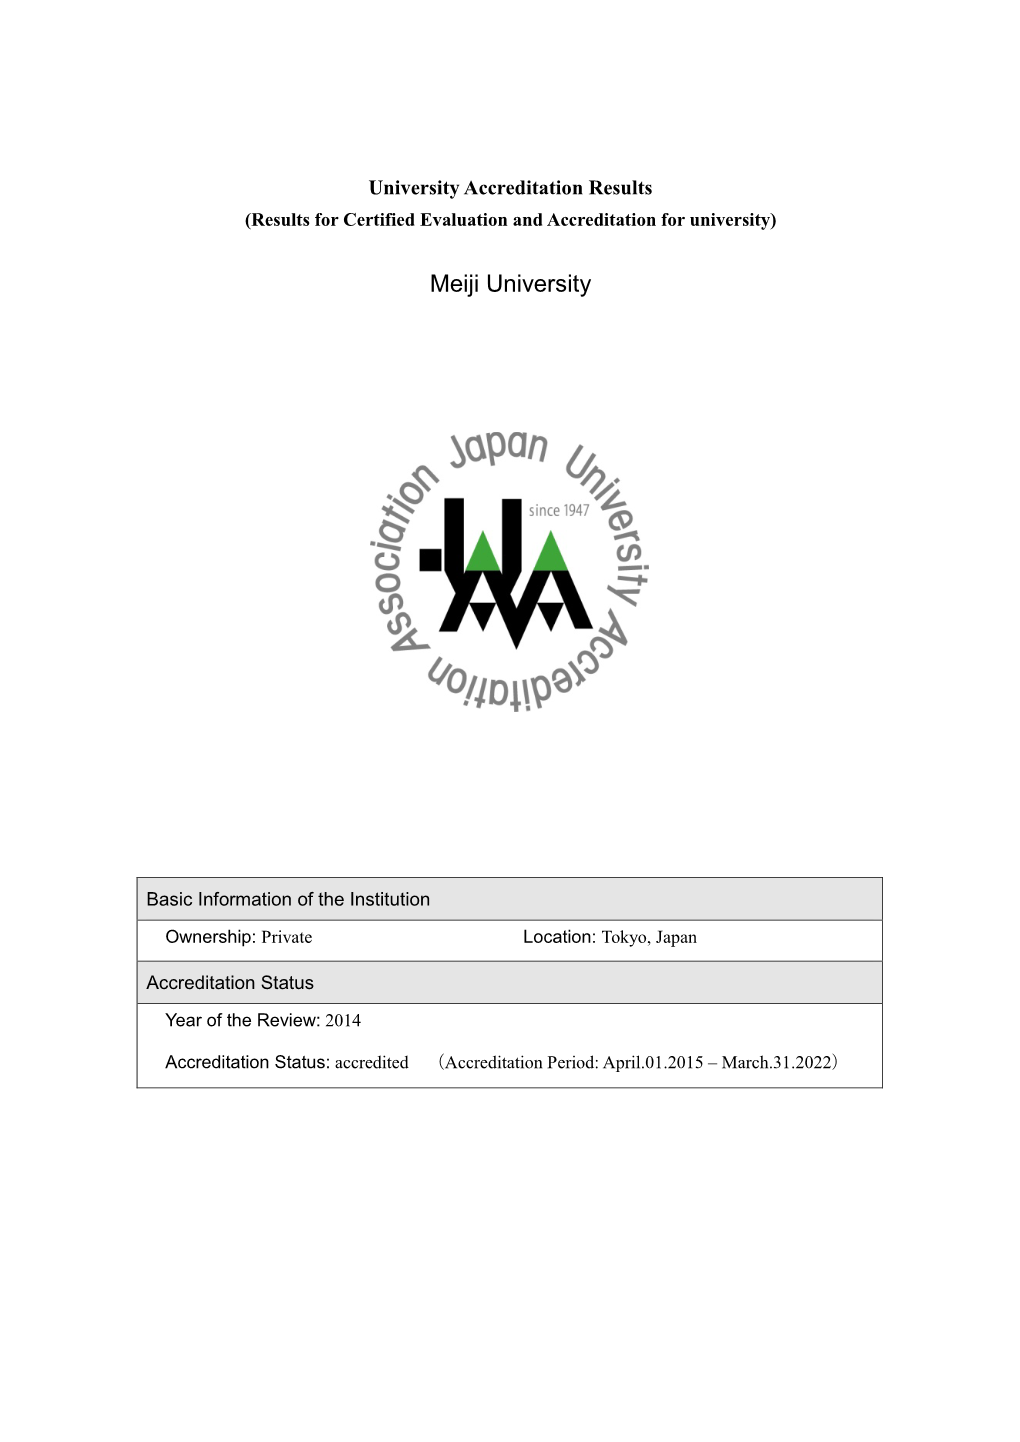 Certified Evaluation and Accreditation Results for Meiji University